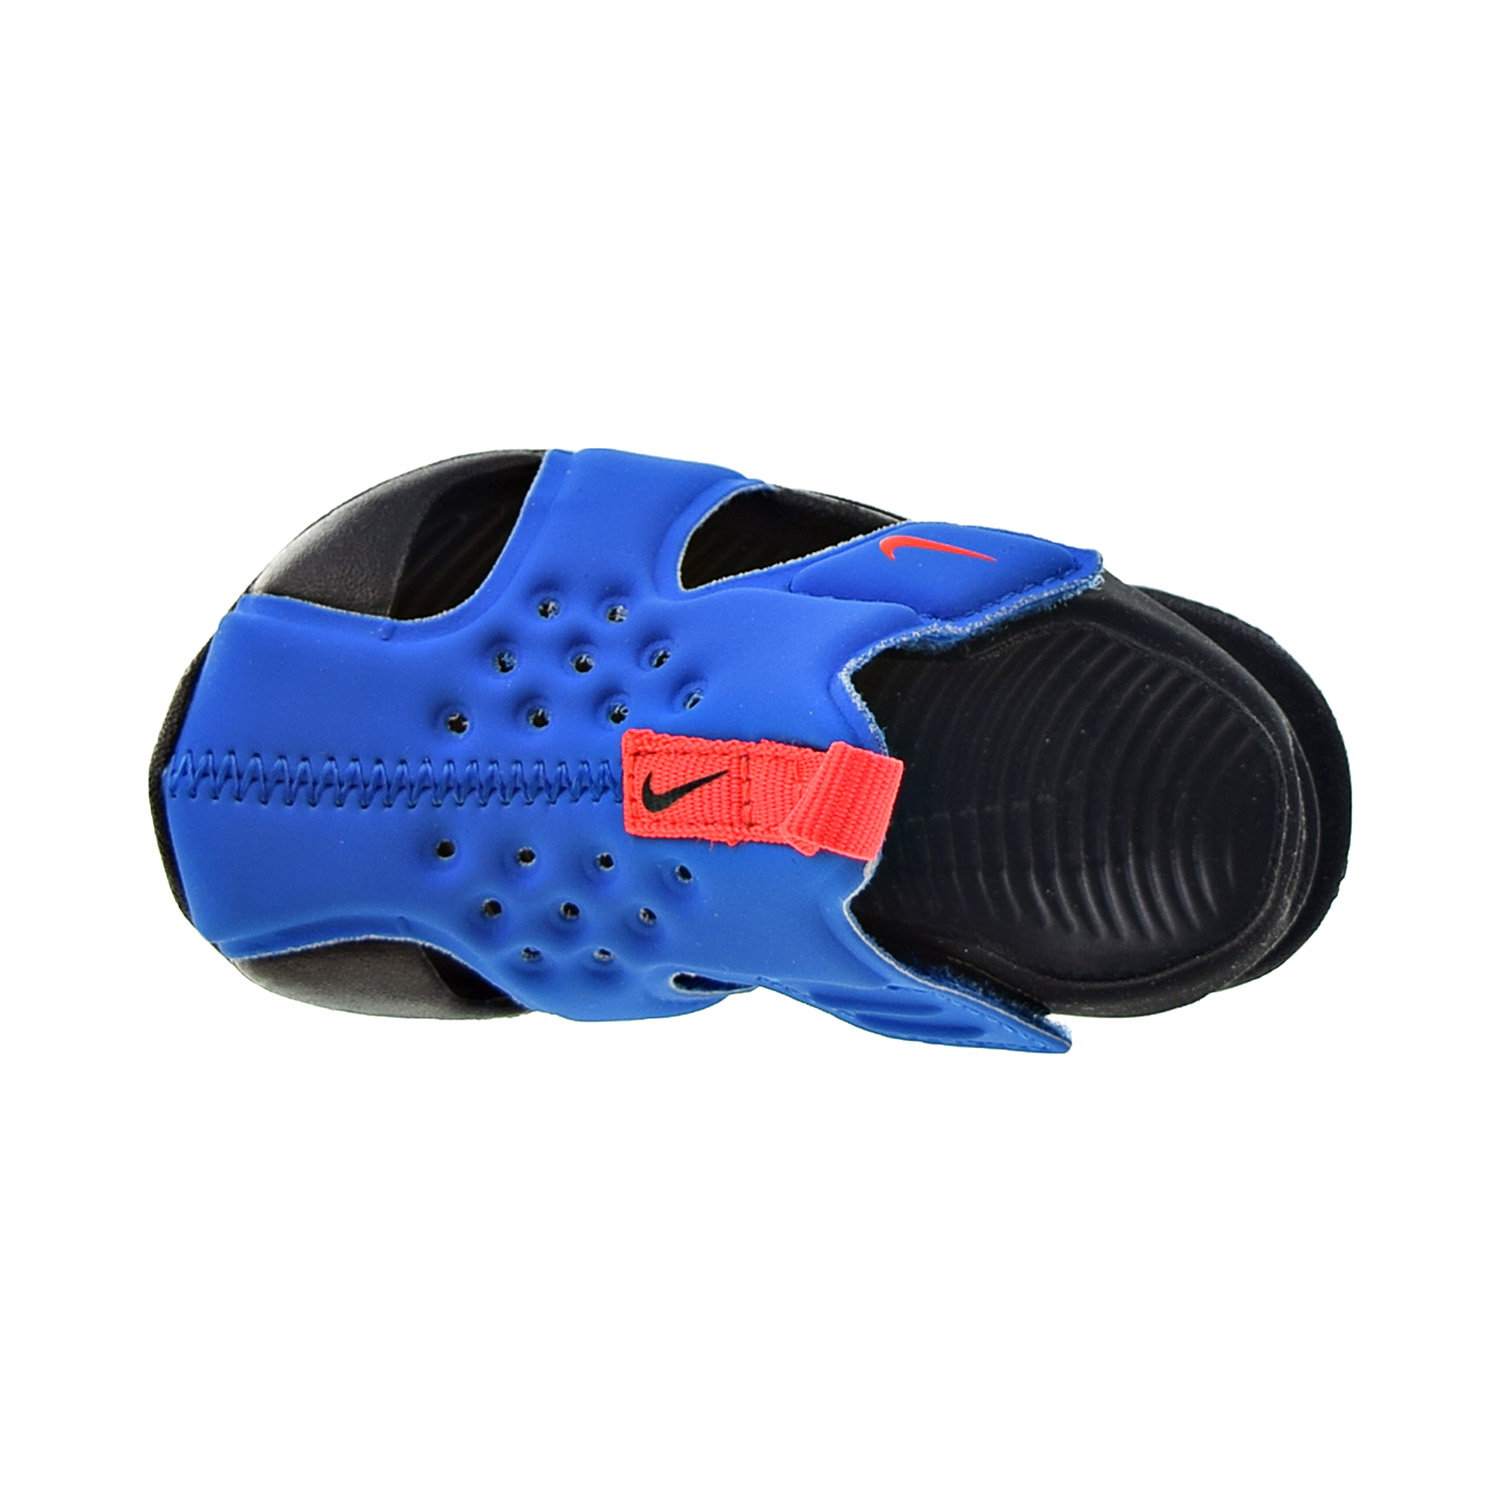 Nike Sunray Protect 2 (TD) Toddlers' Sandals Photo Blue-Bright Crimson 943827-400 - image 5 of 6